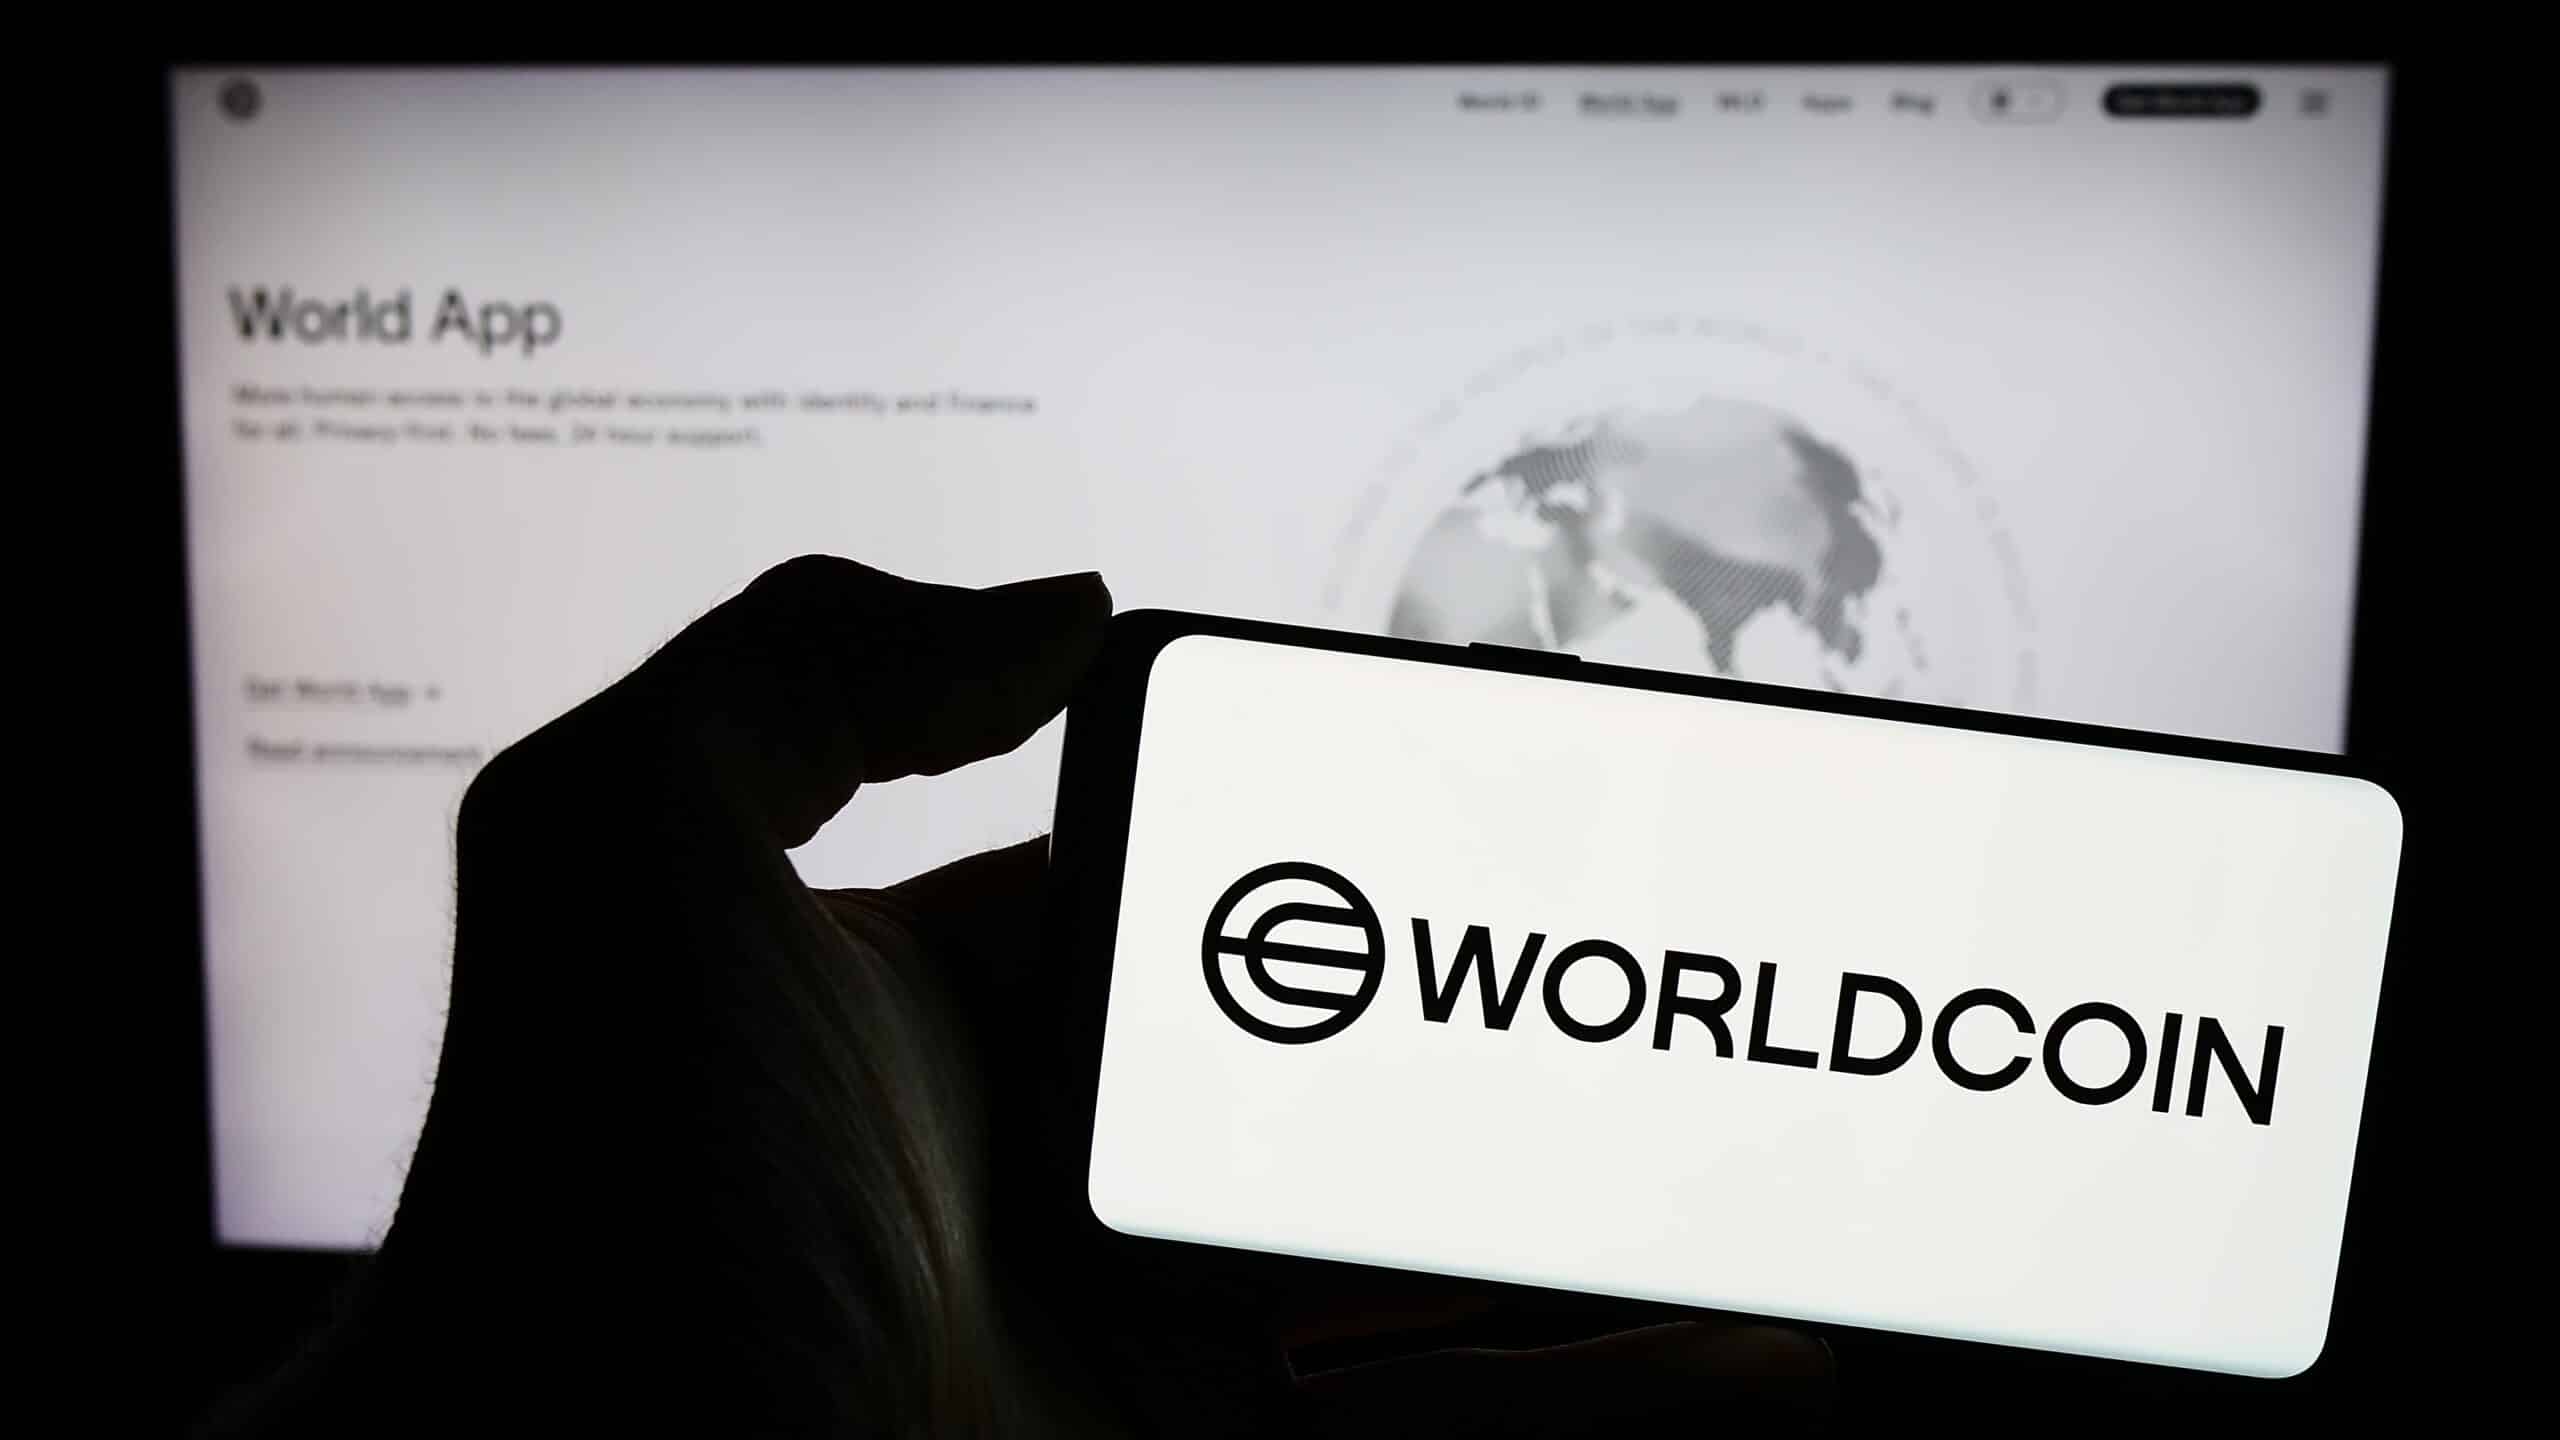 A photo of a hand holding a phone displaying "Worldcoin" and its logo. (Shutterstock/T. Schneider)